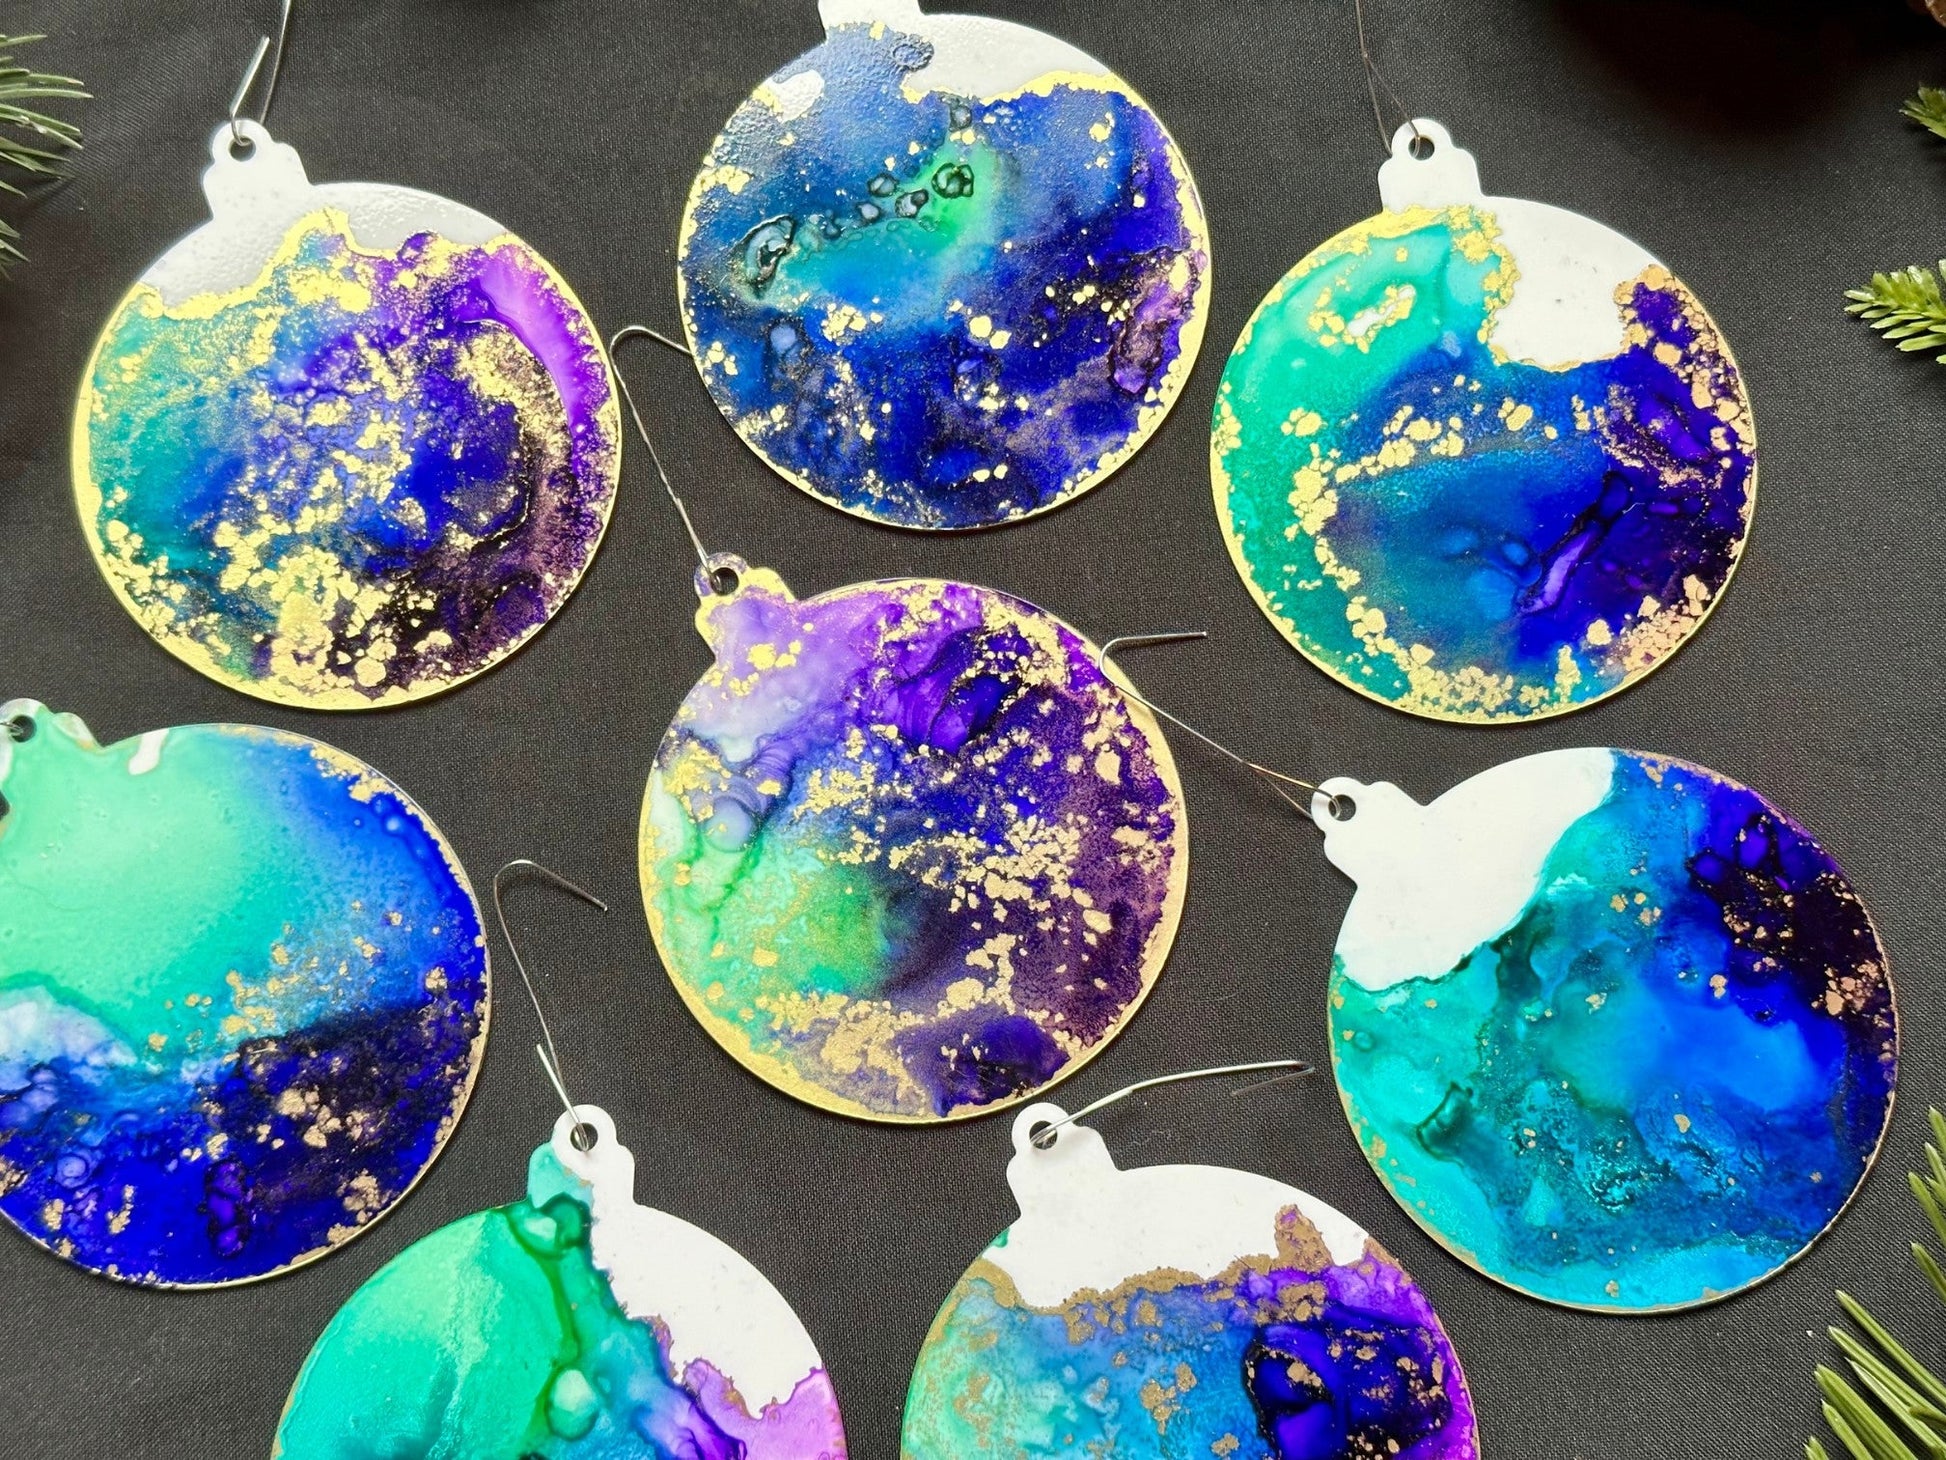 Purple, Teal, Blue and Gold Inks Hand-Painted Ornaments - Set of 8 - Driftless Enchantments